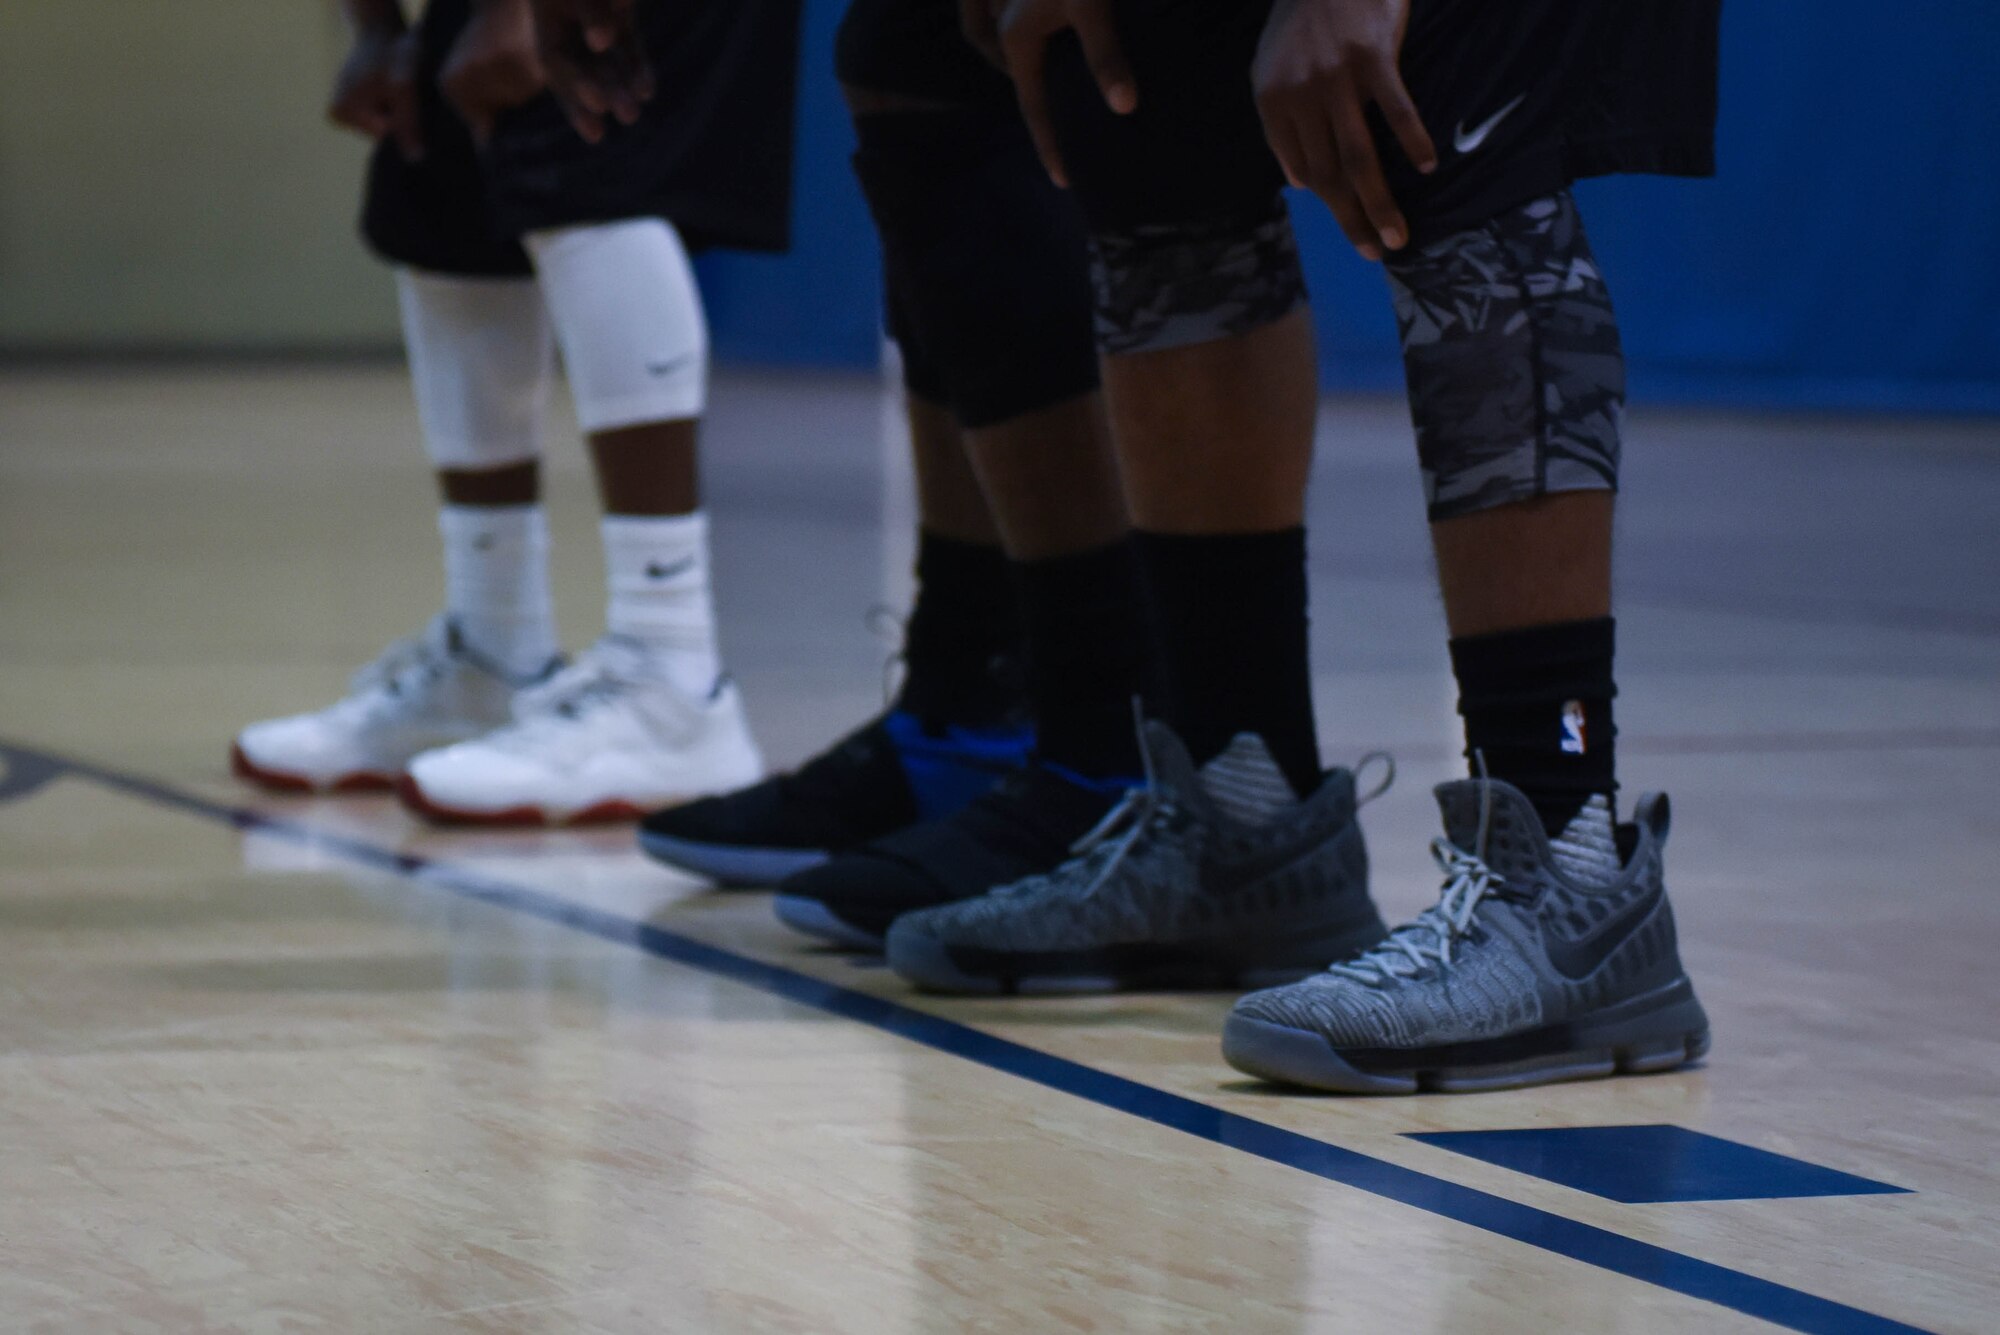 Members of the 2nd Security Forces Squadron basketball team and 2nd Force Support Squadron basketball team wait outside the key for the free throw to be taken at Barksdale Air Force Base, La., April 18, 2017. The Defenders won the second game 46-39 which made them champions of the basketball tournament. (Air Force photo/Airman 1st Class Stuart Bright)